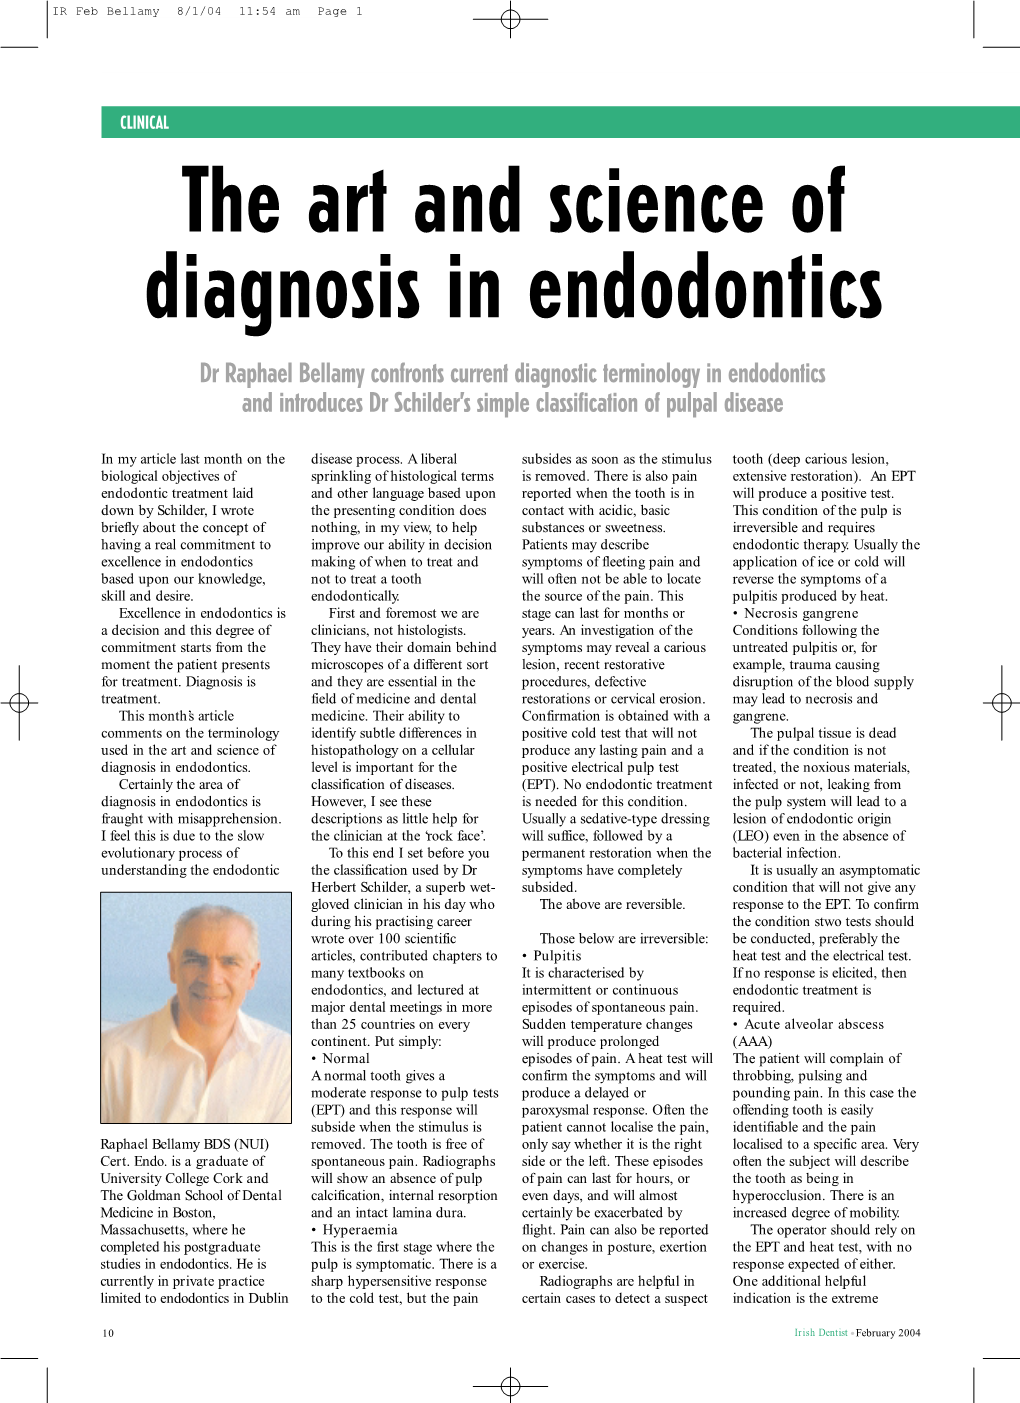 The Art and Science of Diagnosis in Endodontics